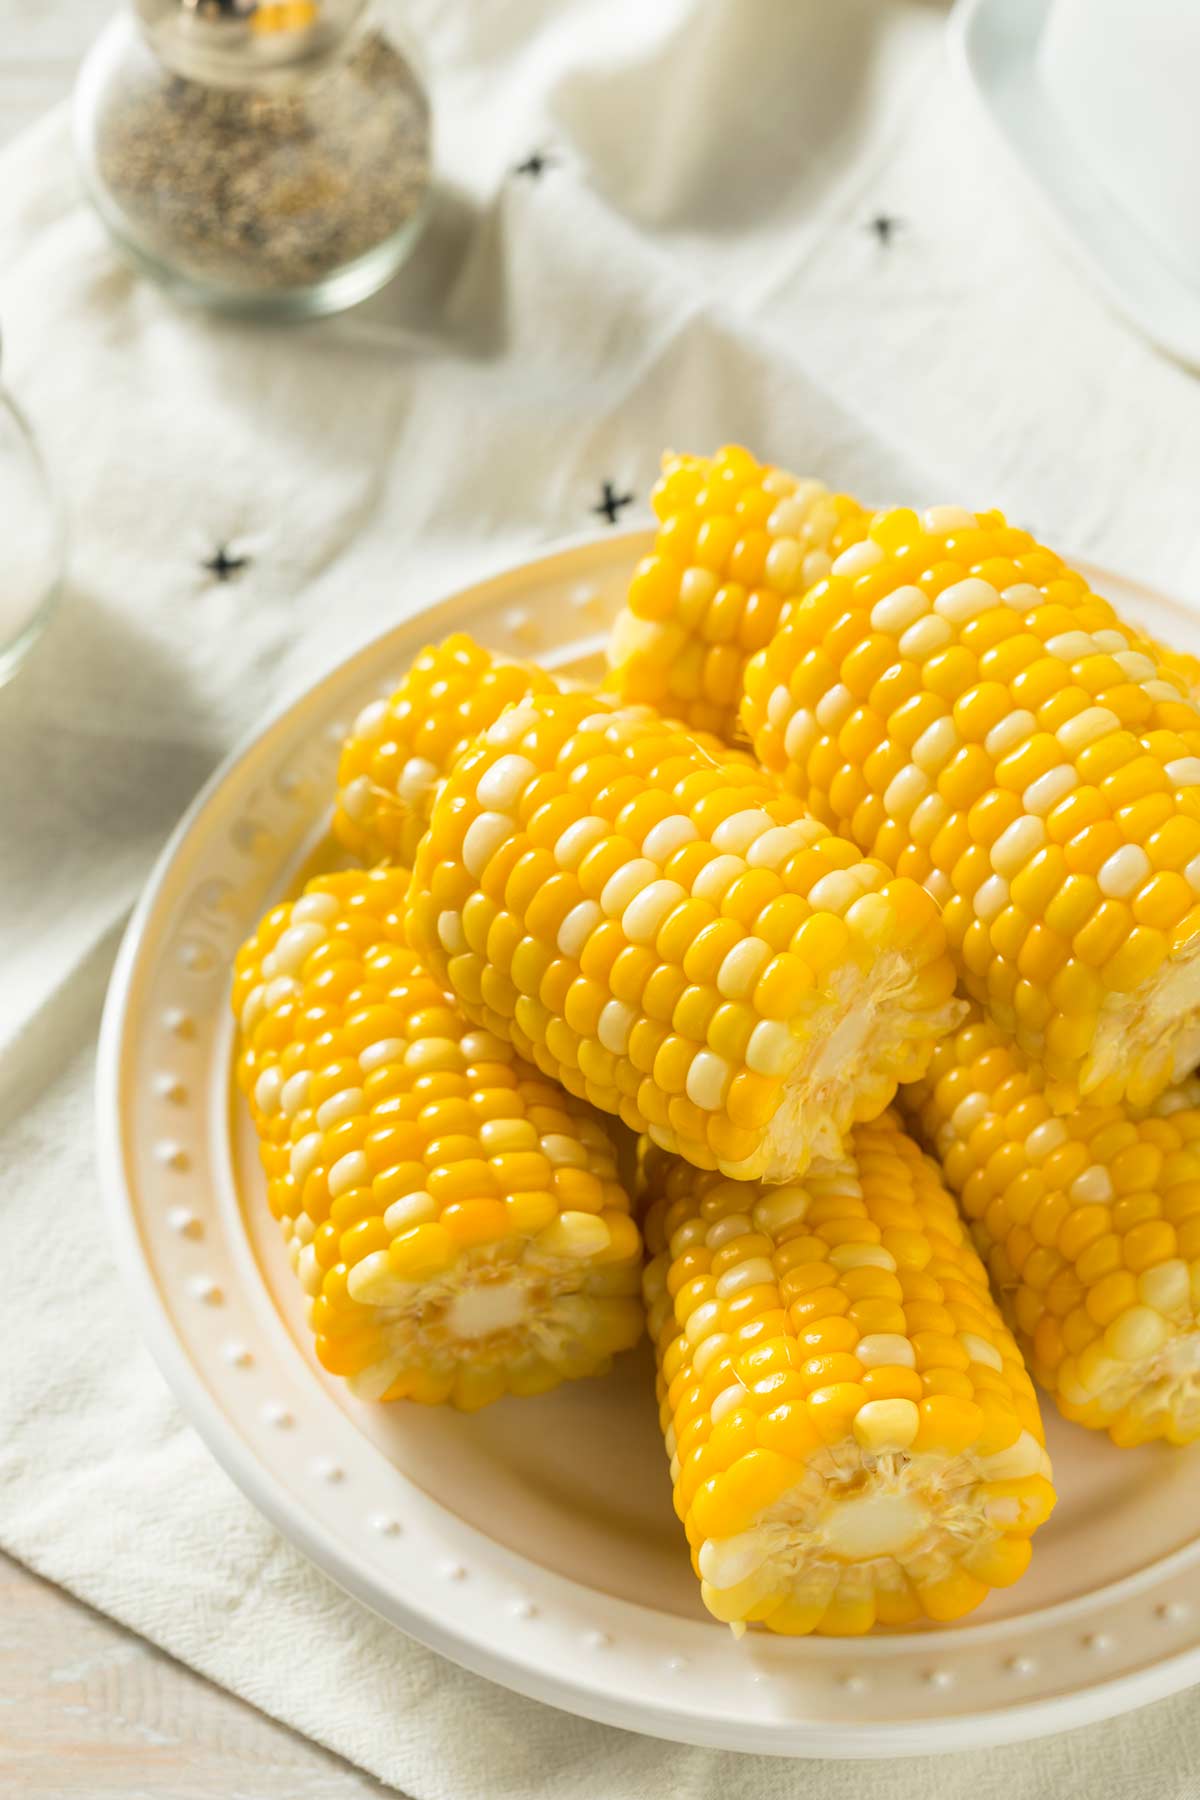 corn on the cob cut in half on a cream plate with a dimpled edge.